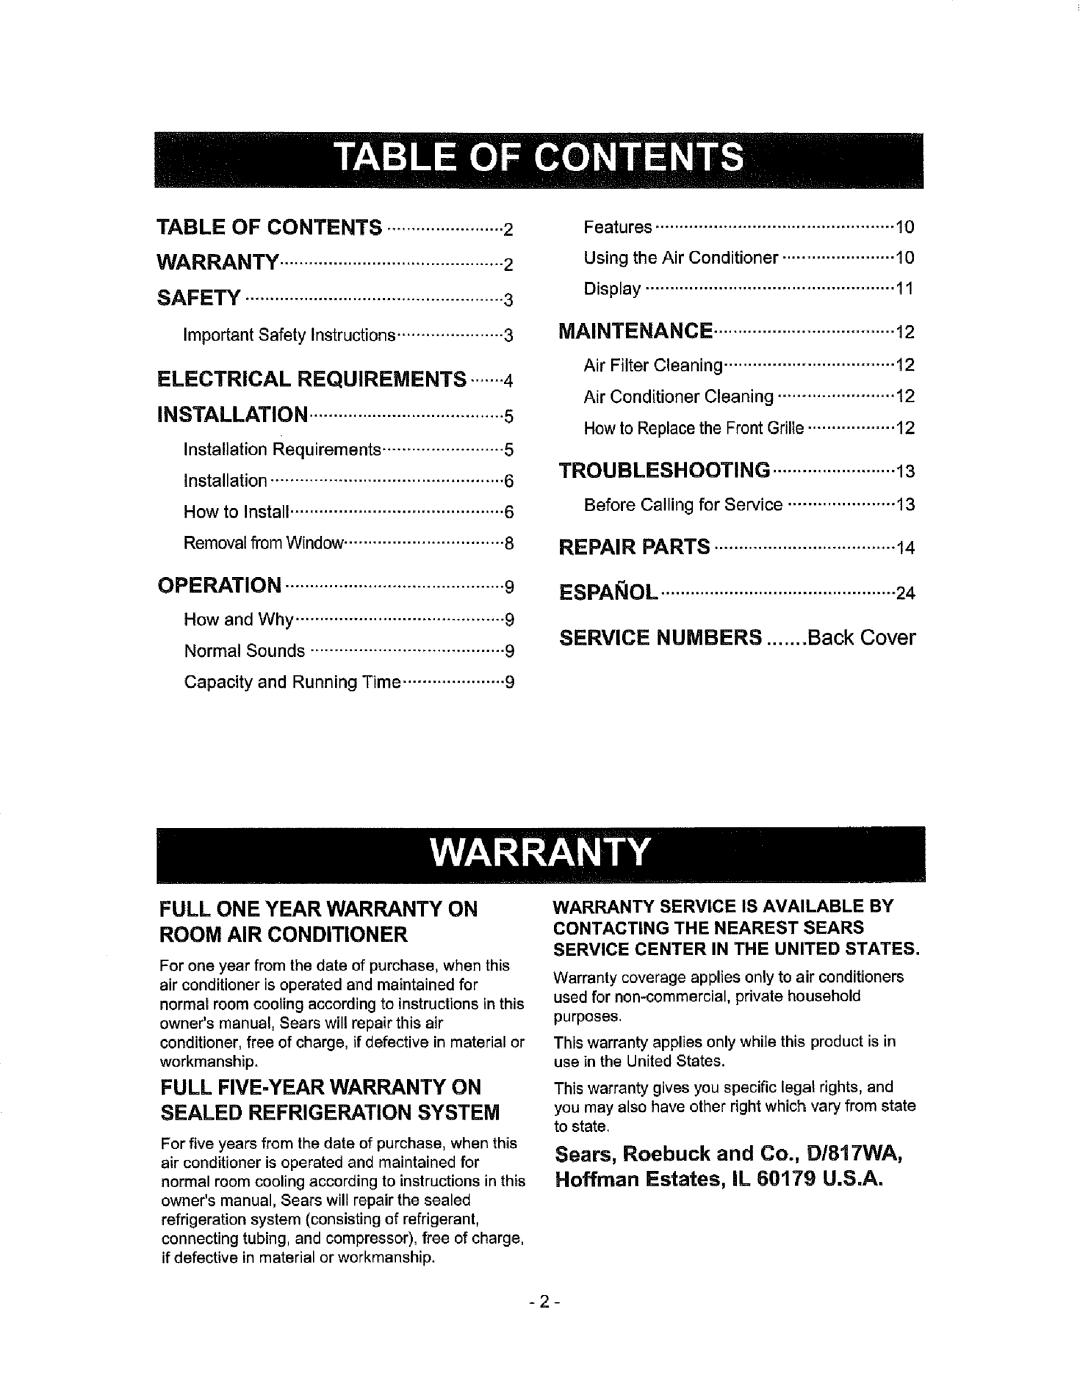 Kenmore 580.72184 owner manual Safety 